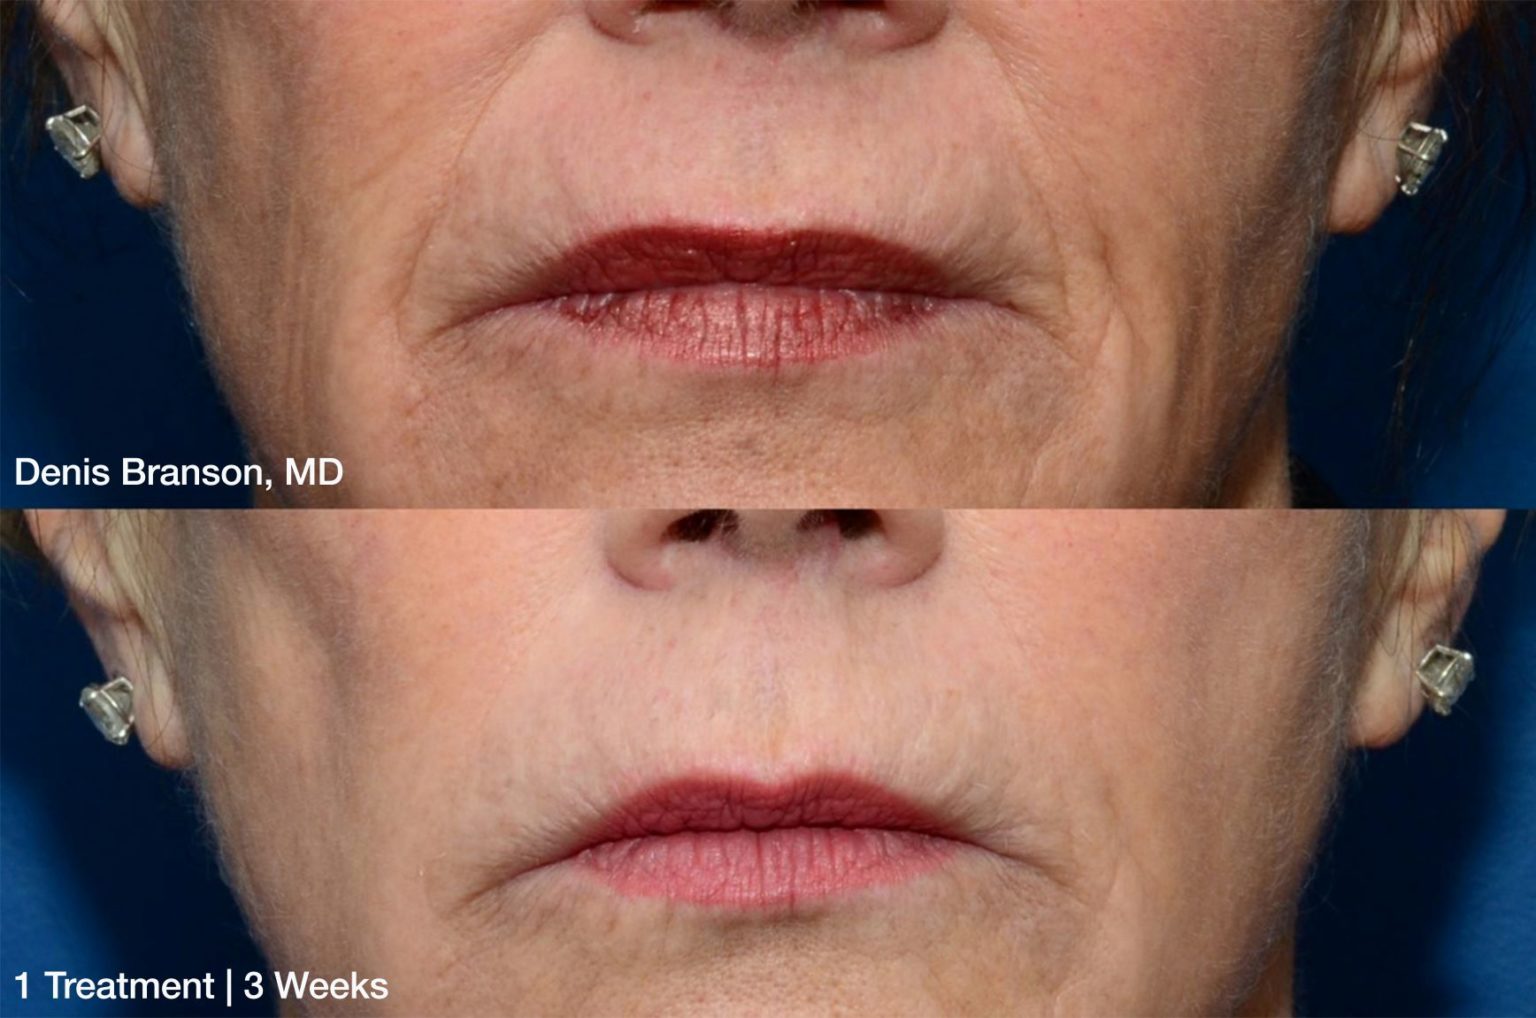 Denis Branson ThermiSmooth Face Mouth 1 treatment 3 weeks Patient 2 1536x1018 2